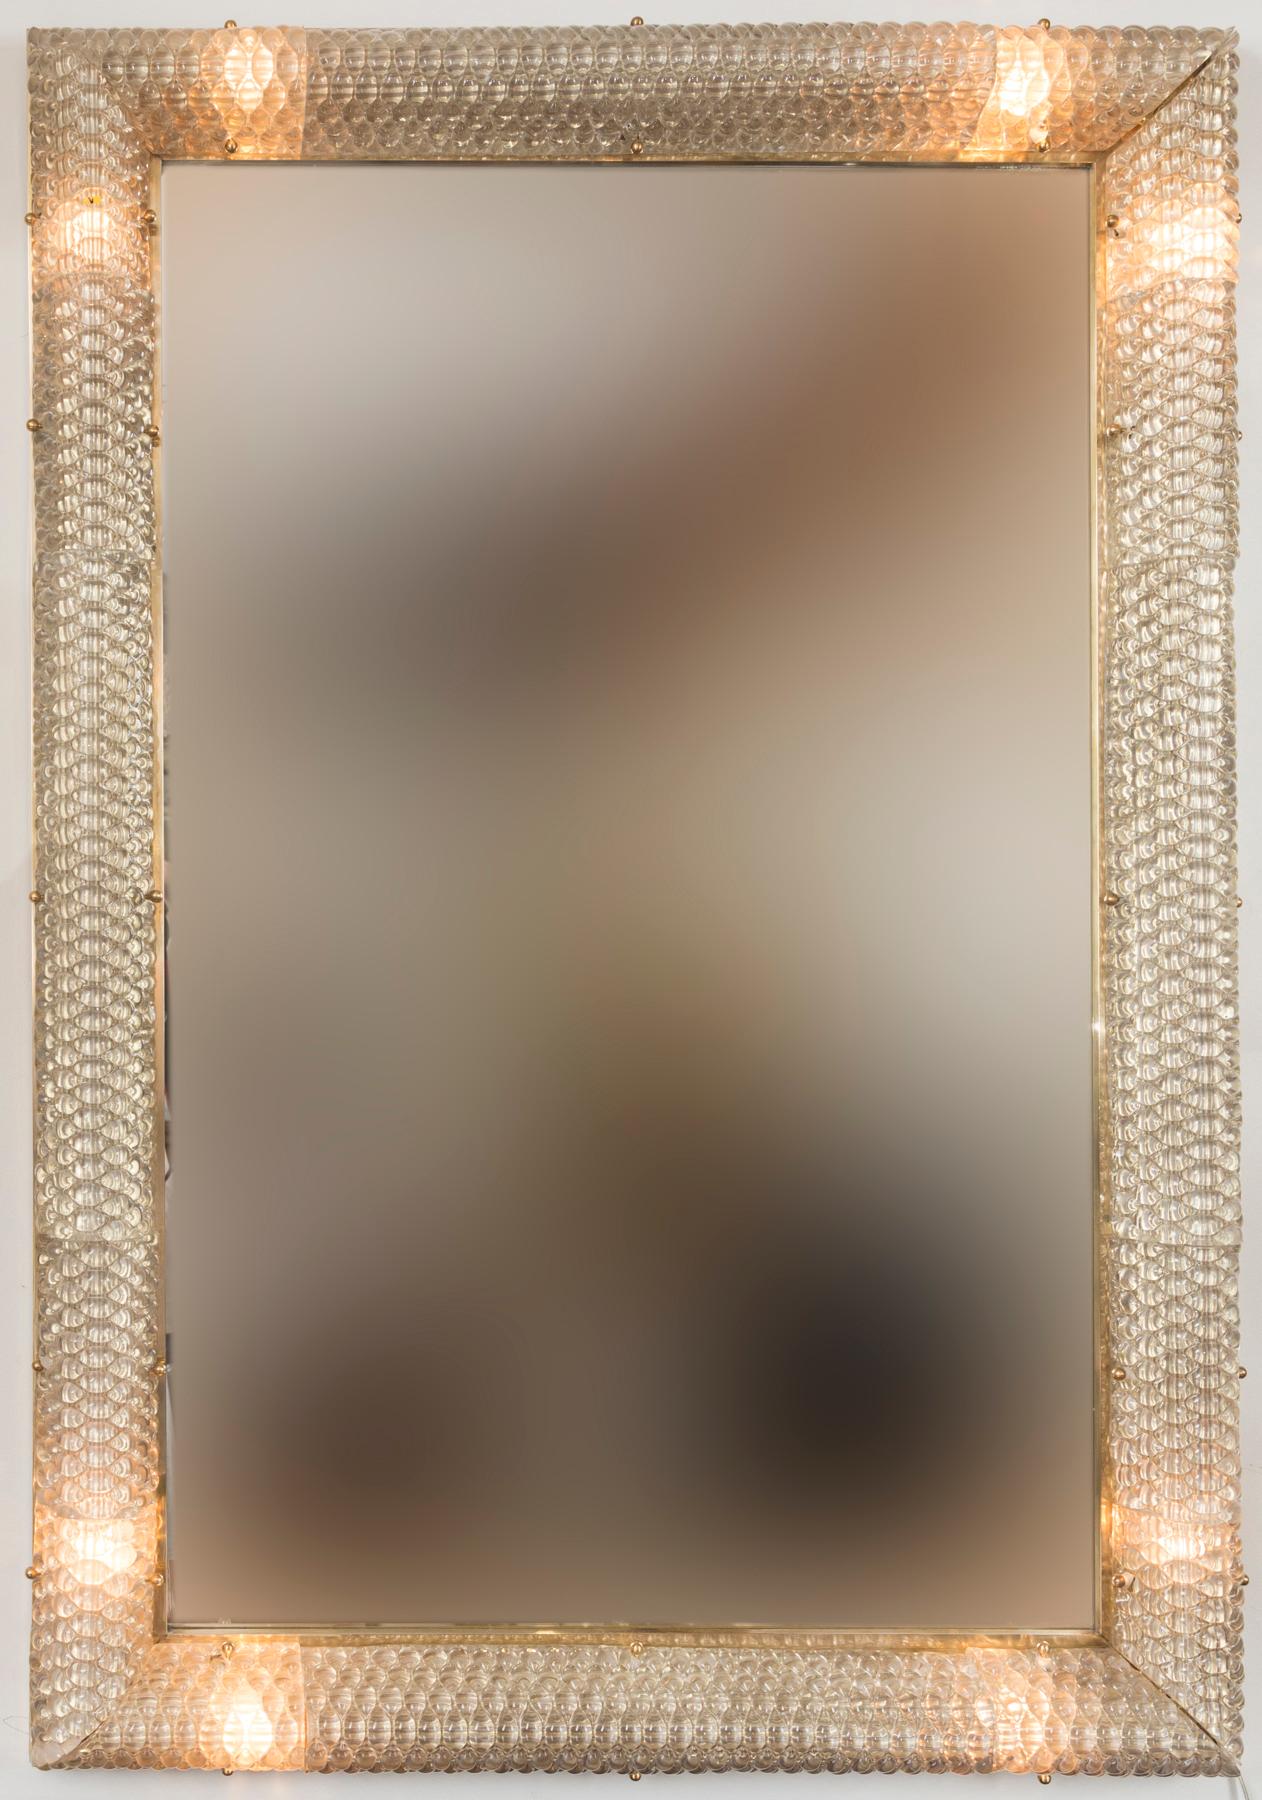 Shimmery blown taupe colored glass placed into textured molds to form a beveled framed mirror that can also illuminate, electrified to US standards with US porcelain interior sockets, beautiful on or off.  Electrified to US standards with US